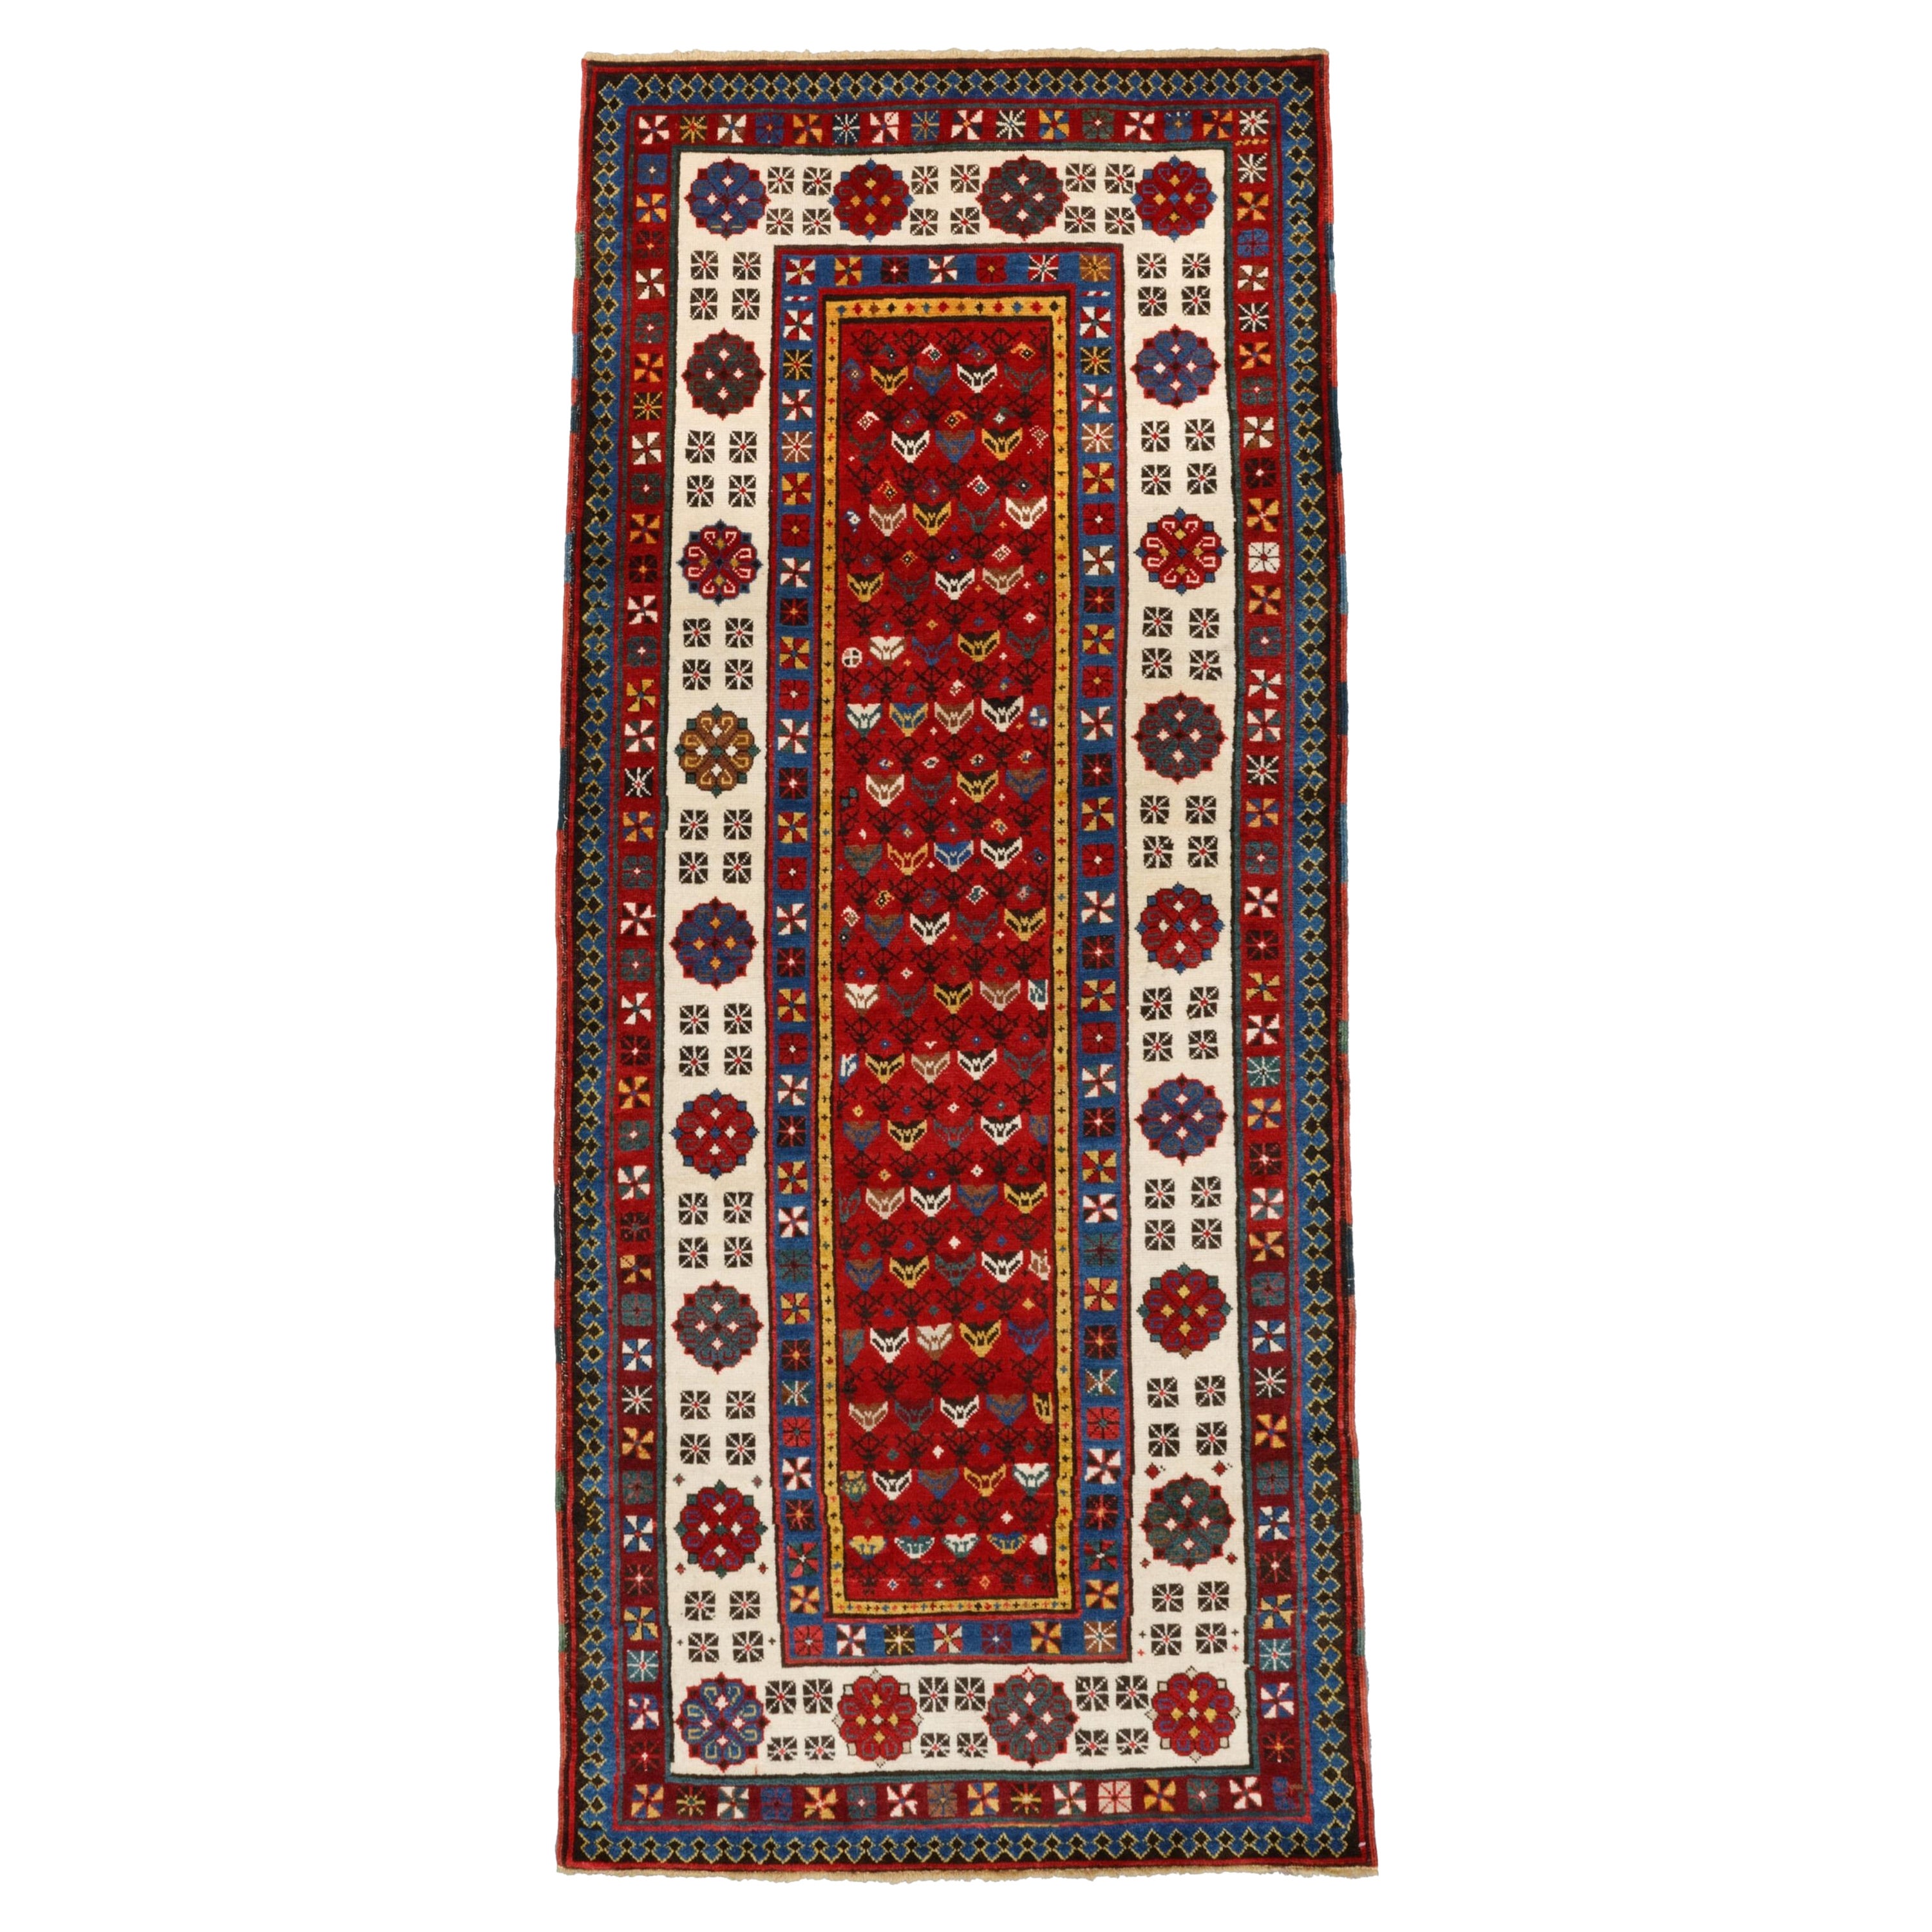 Antique Talish Rug - Late Of The 19th Century Talish Rug, Caucasian Rug For Sale